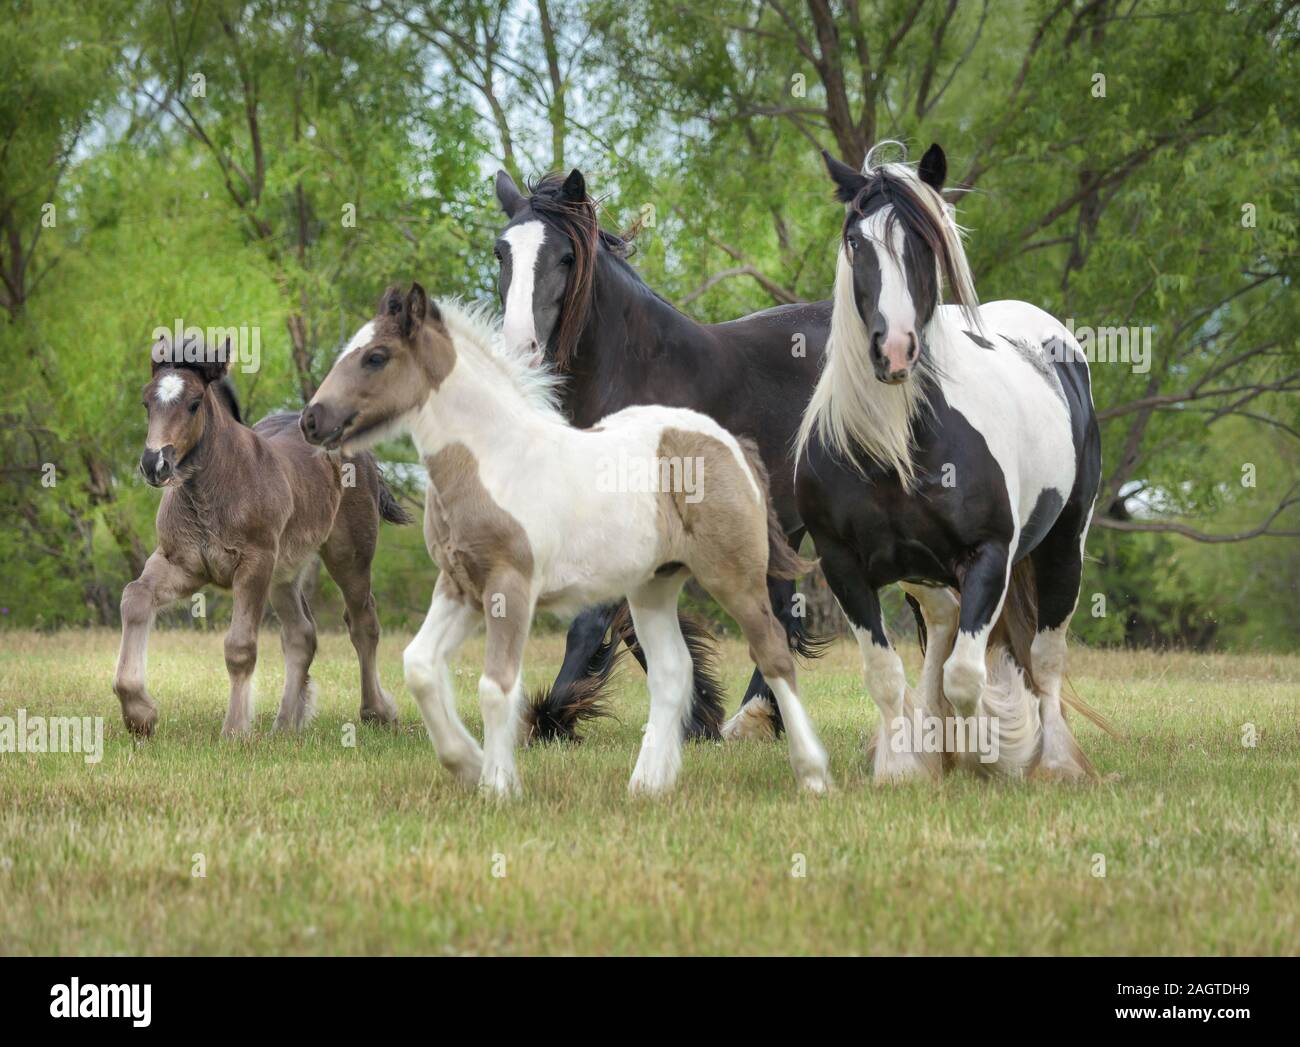 Gypsy Horse mares and foal running Stock Photo